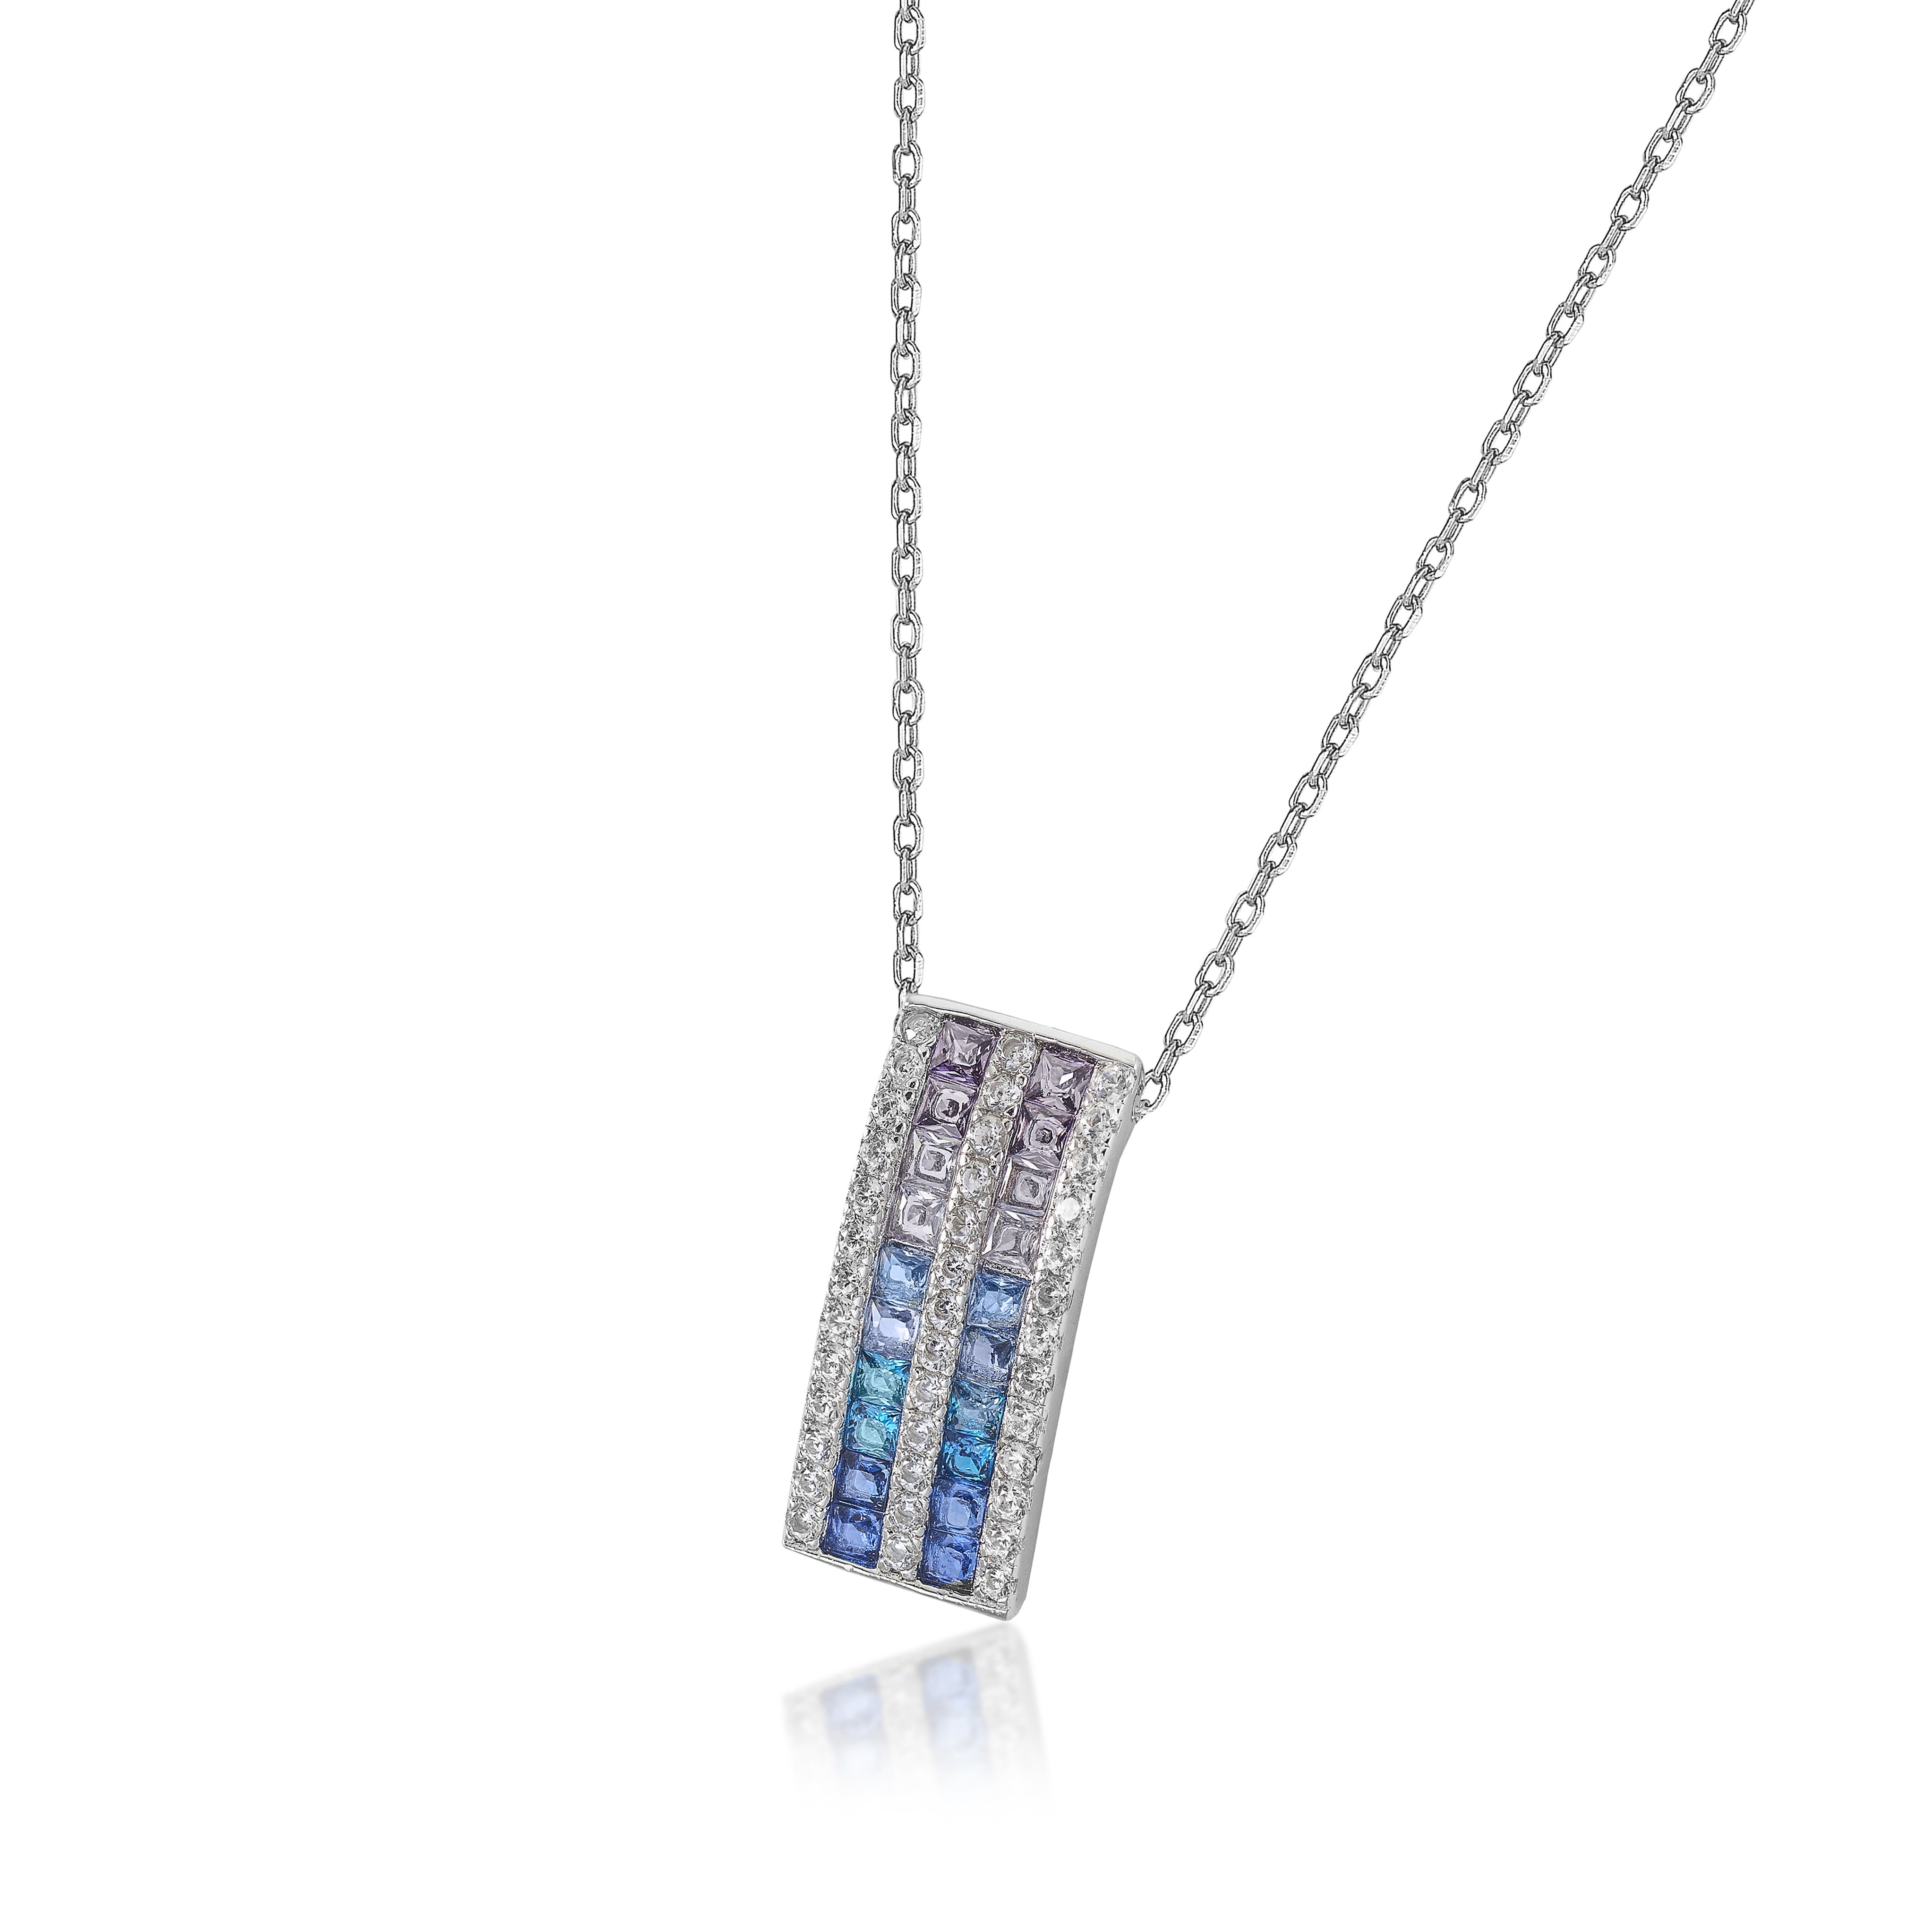 Necklaces with blue stones and zircons